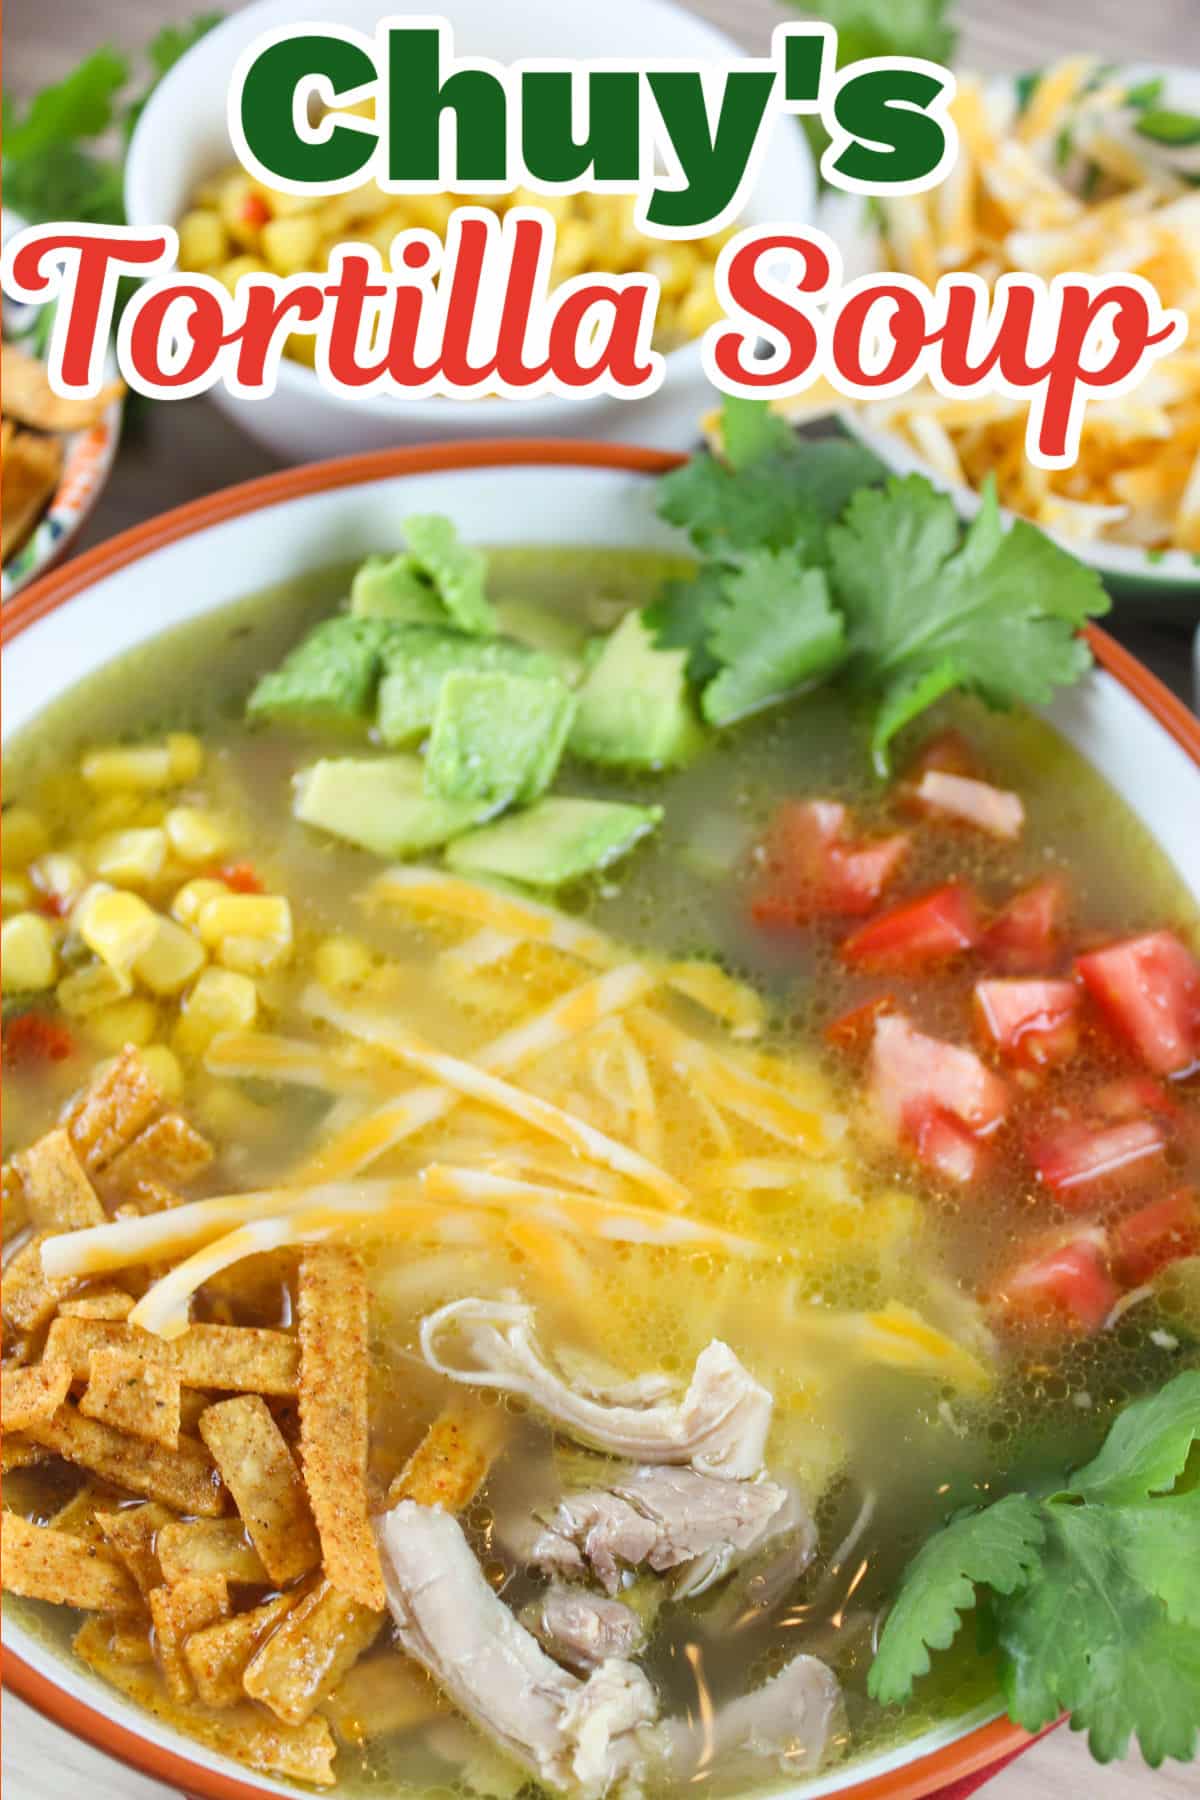 Chuy's Tortilla Soup is unique because you make the homemade chicken broth from scratch! It's so much more delicious and really simple! This perfect cold day soup is  loaded with veggies, chicken and fresh herbs then topped with tortilla strips and avocado chunks.  via @foodhussy